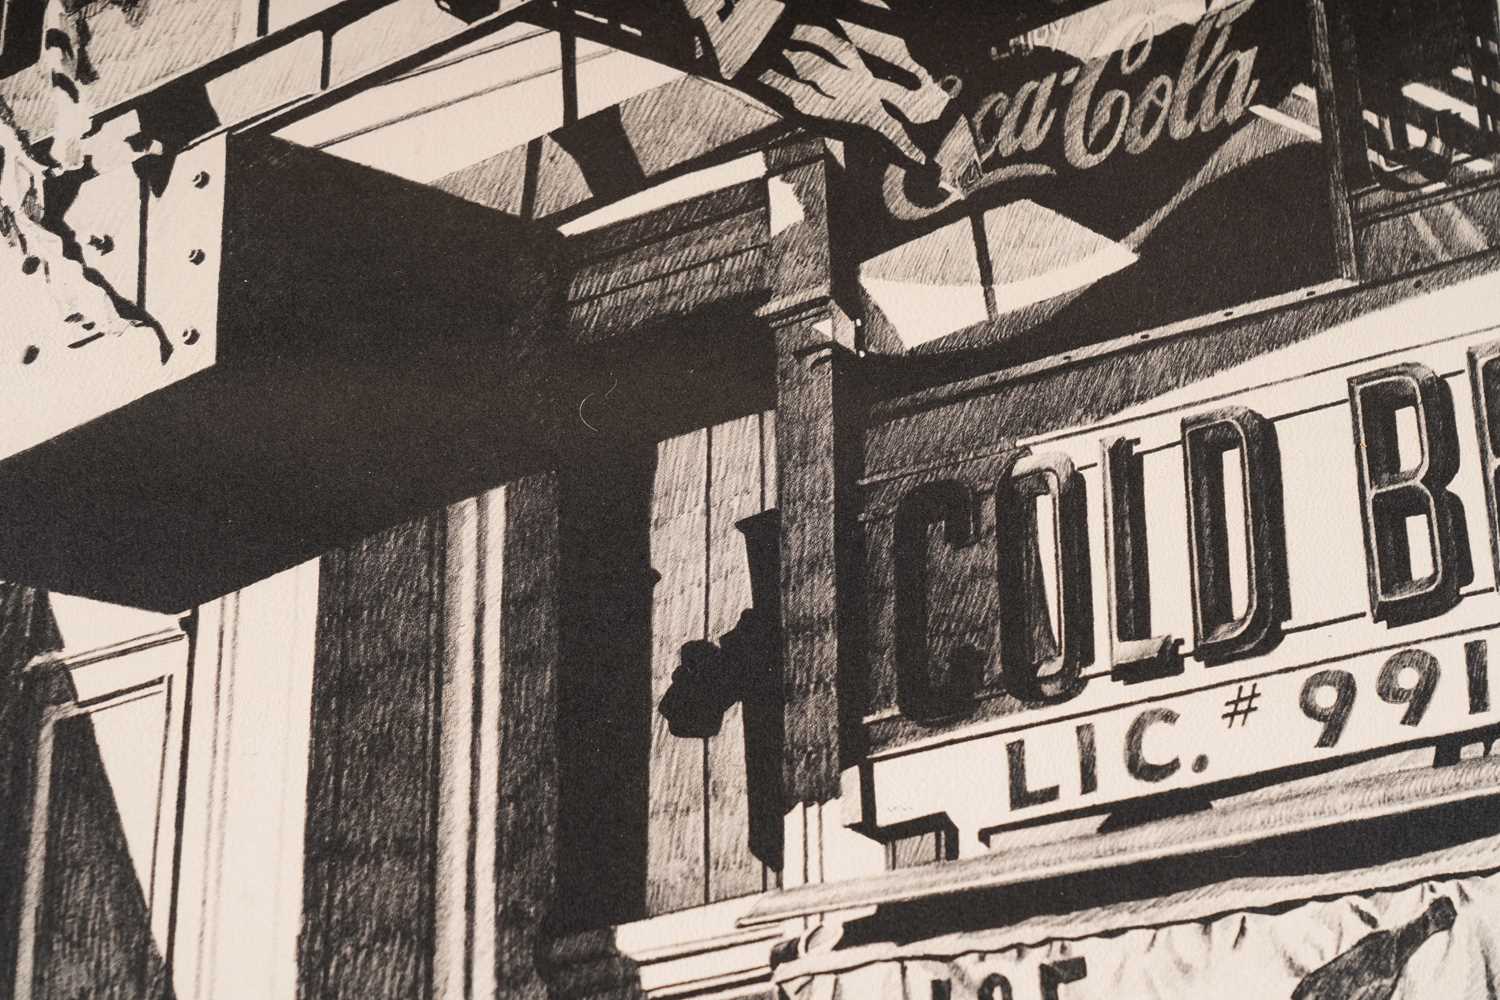 Robert Cottingham - Cold Beer | lithograph - Image 3 of 3